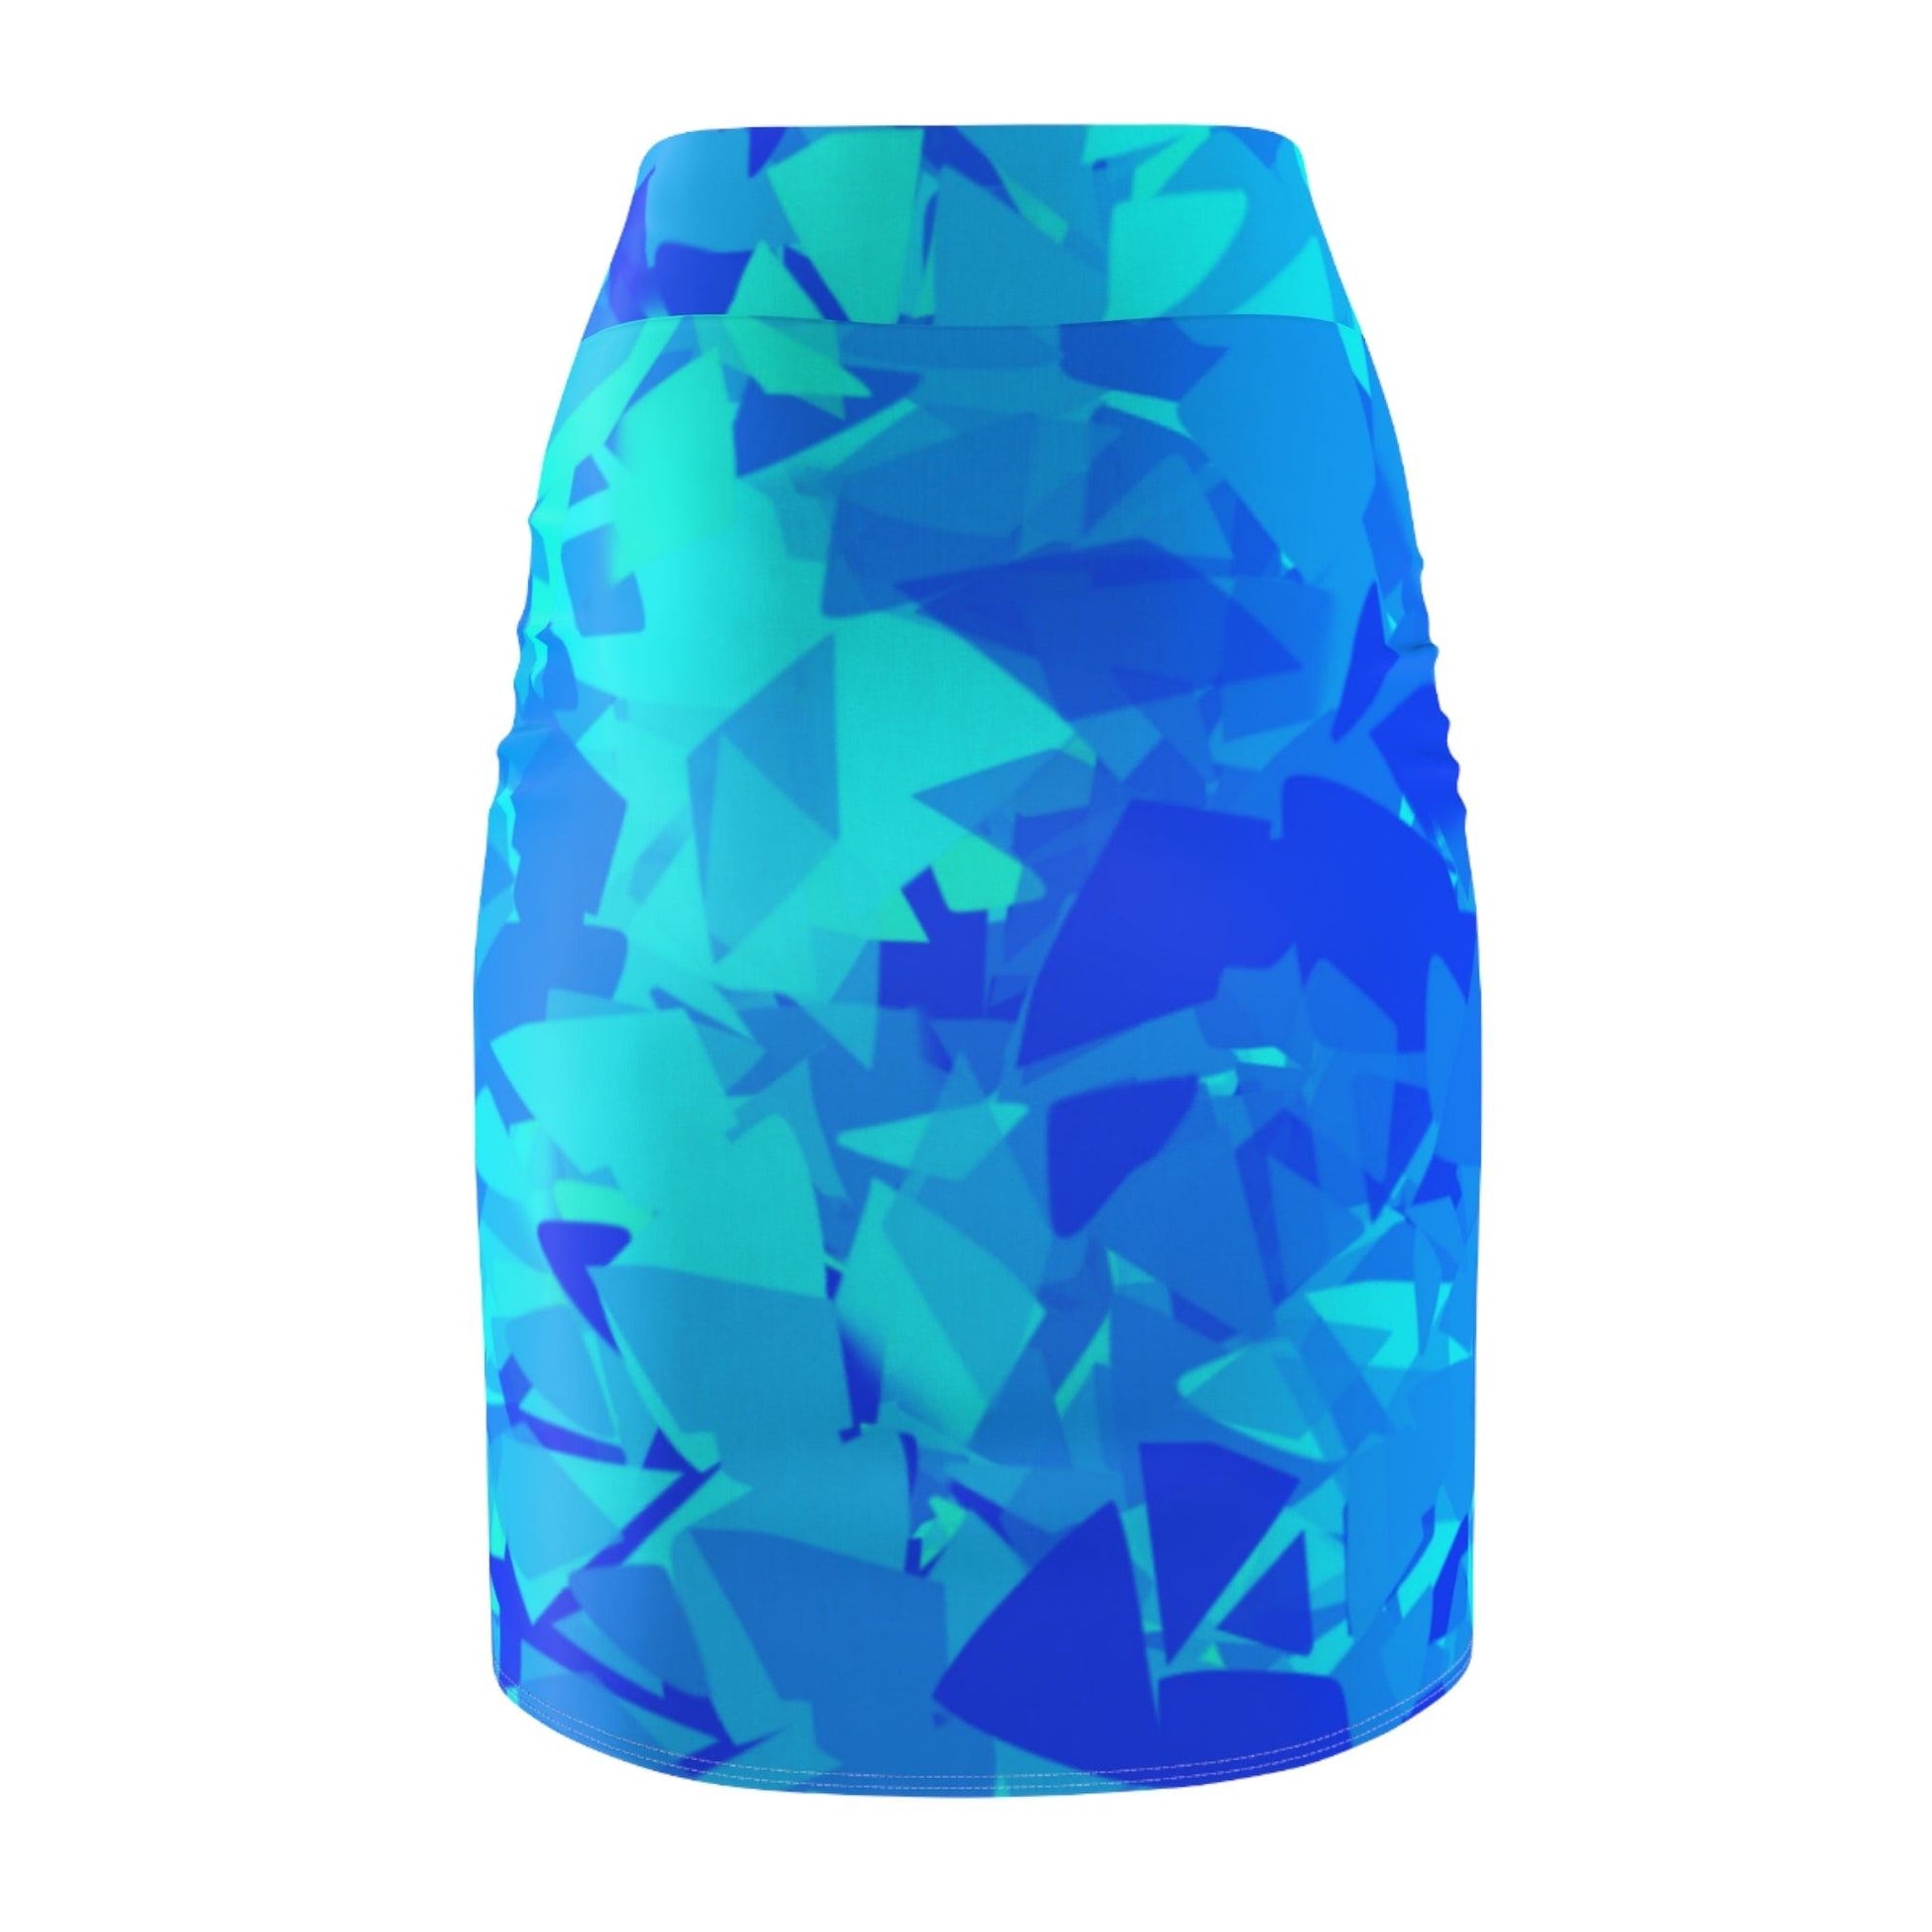 Blue Crystal Bleistiftrock Bleistiftrock 74.99 All Over Print, AOP, AOP Clothing, Assembled in the USA, Assembled in USA, Bleistiftrock, Blue, Crystal, Made in the USA, Made in USA, Skirts & Dresses, Sublimation, Women's Clothing JLR Design